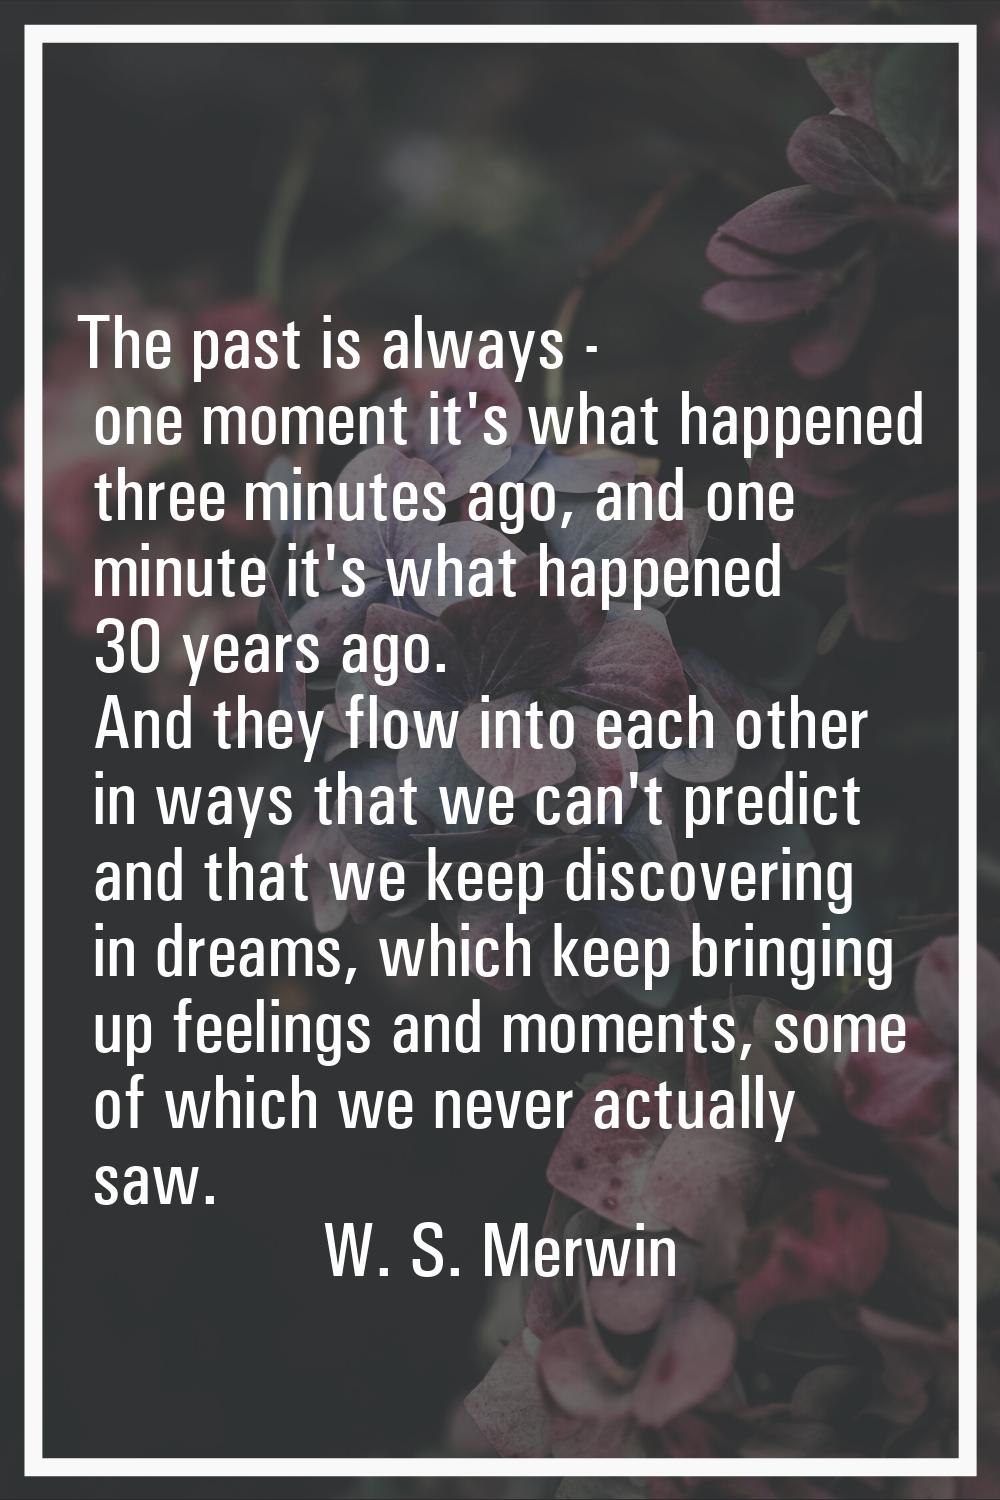 The past is always - one moment it's what happened three minutes ago, and one minute it's what happ